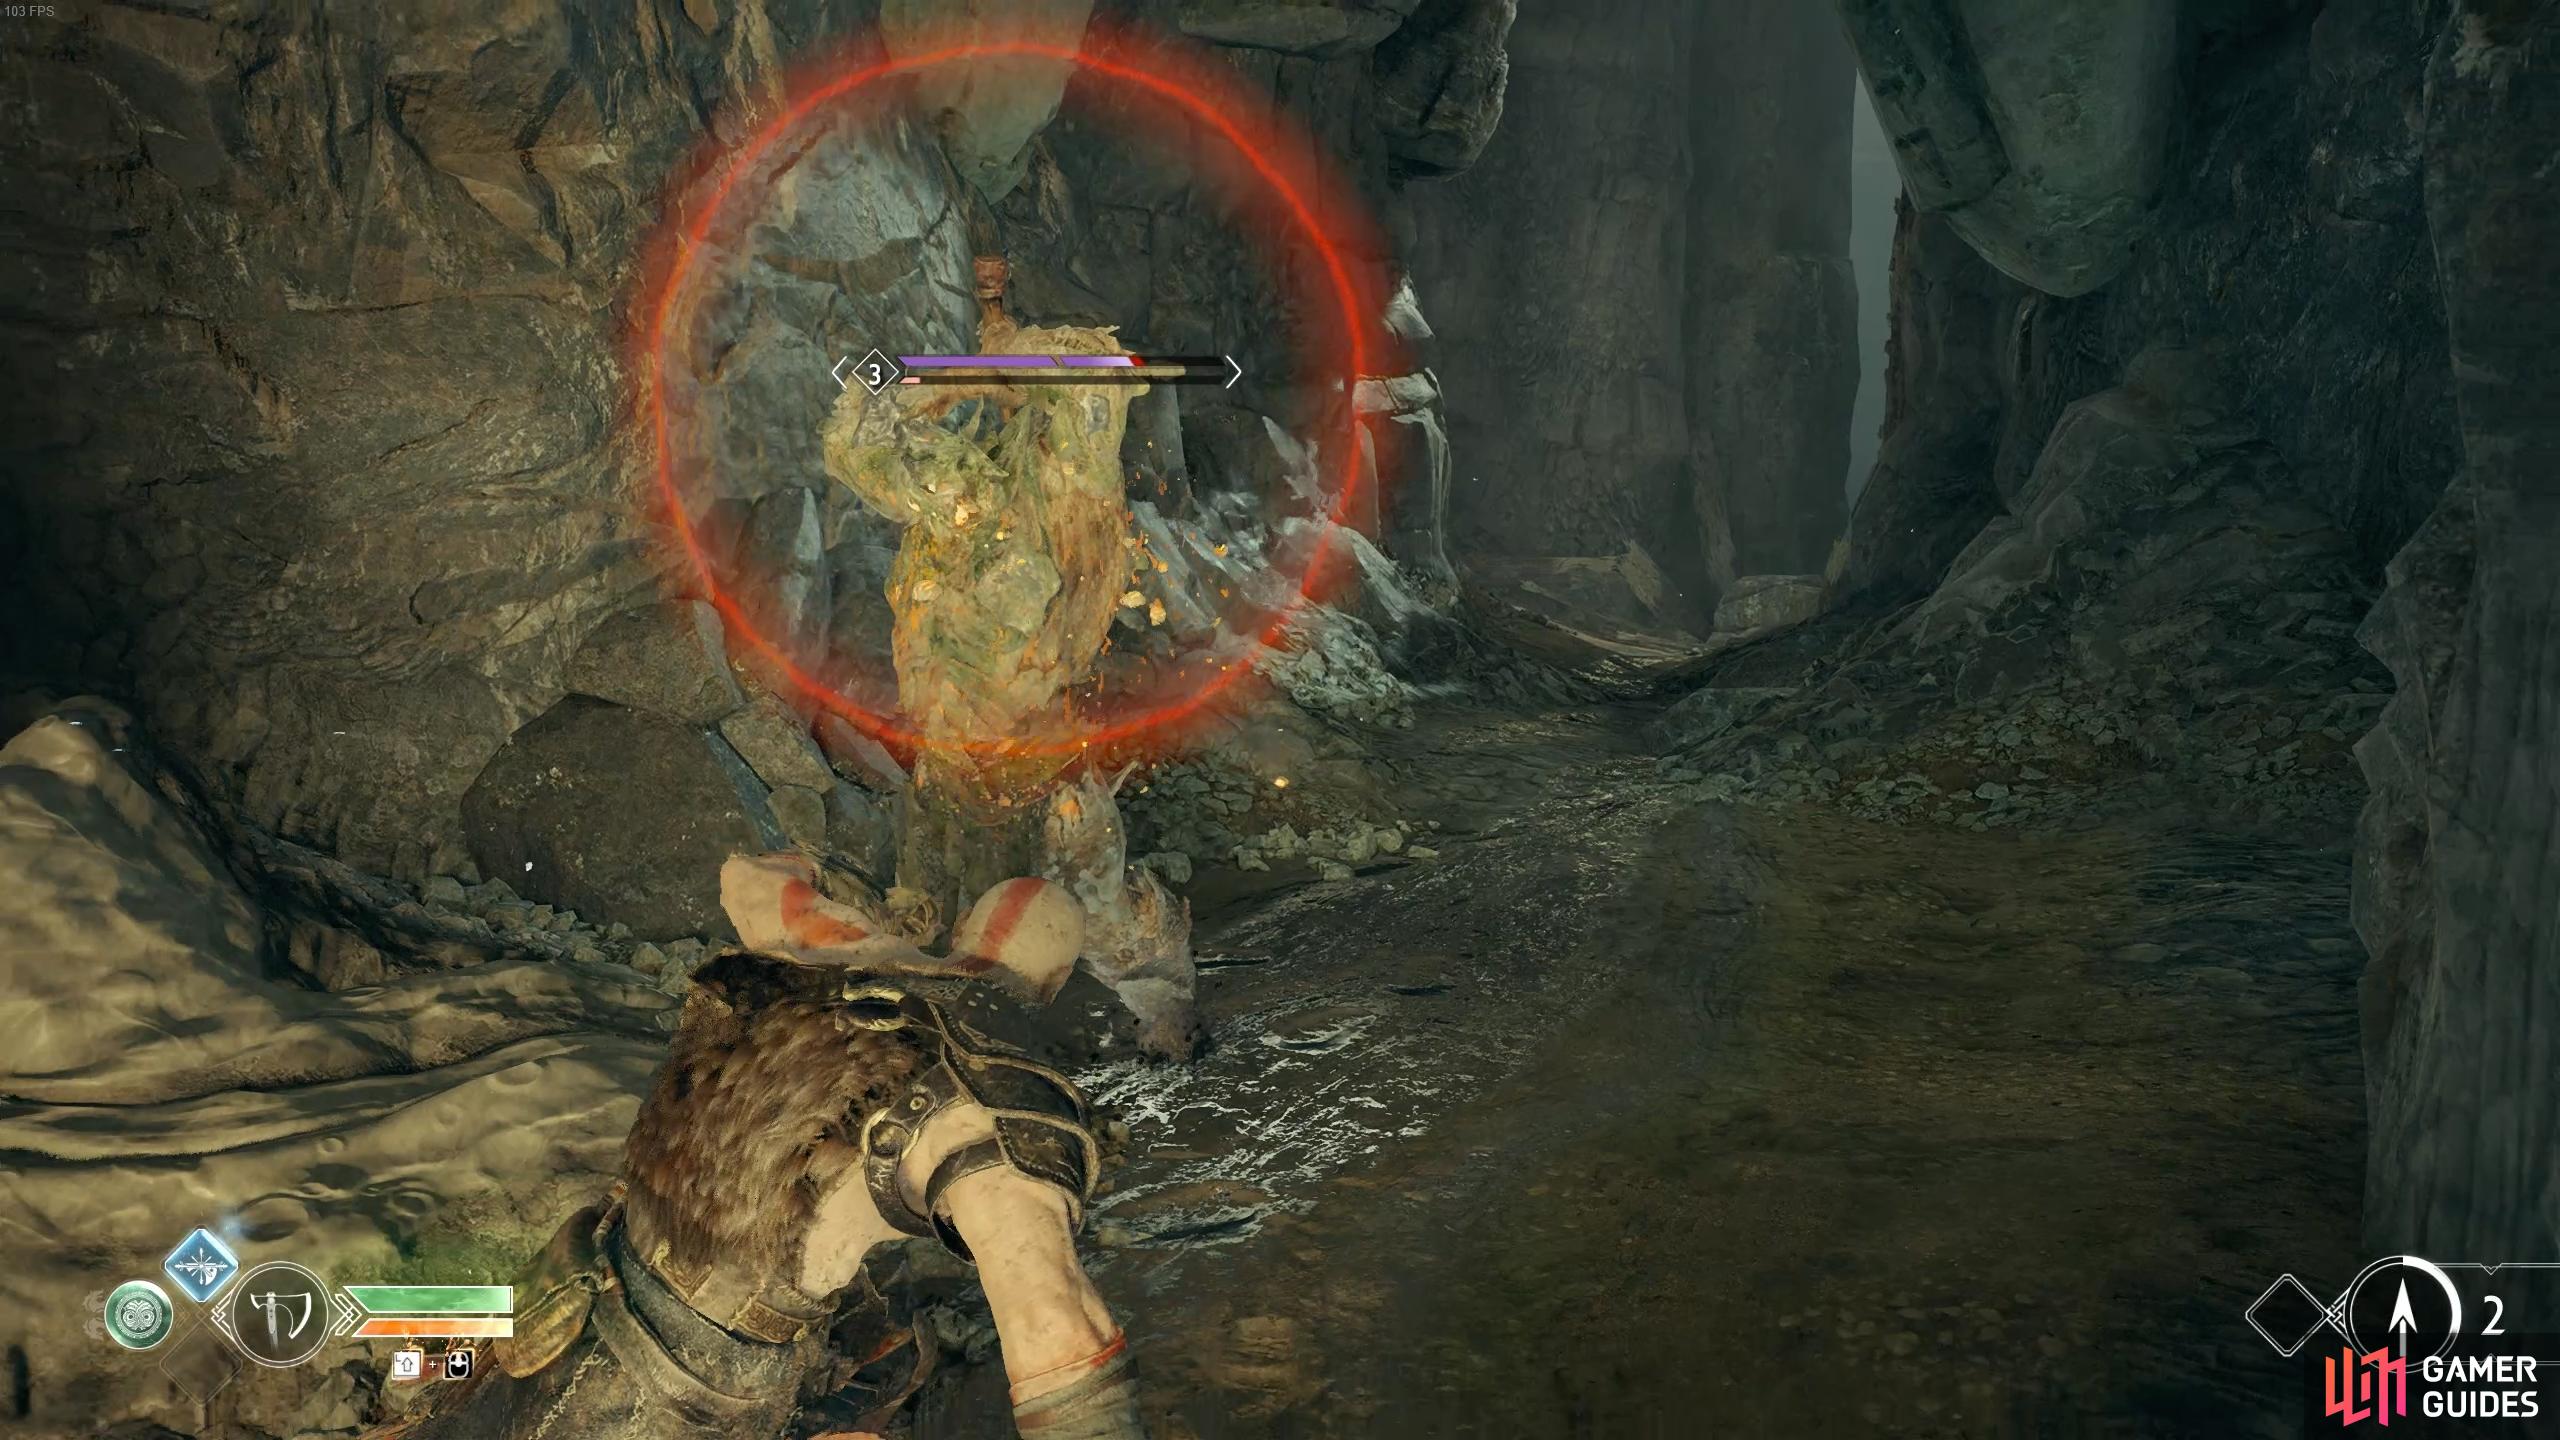 You'll need to dodge heavy attacks by looking out for the red circle, which appears when a Draugr is higher level.